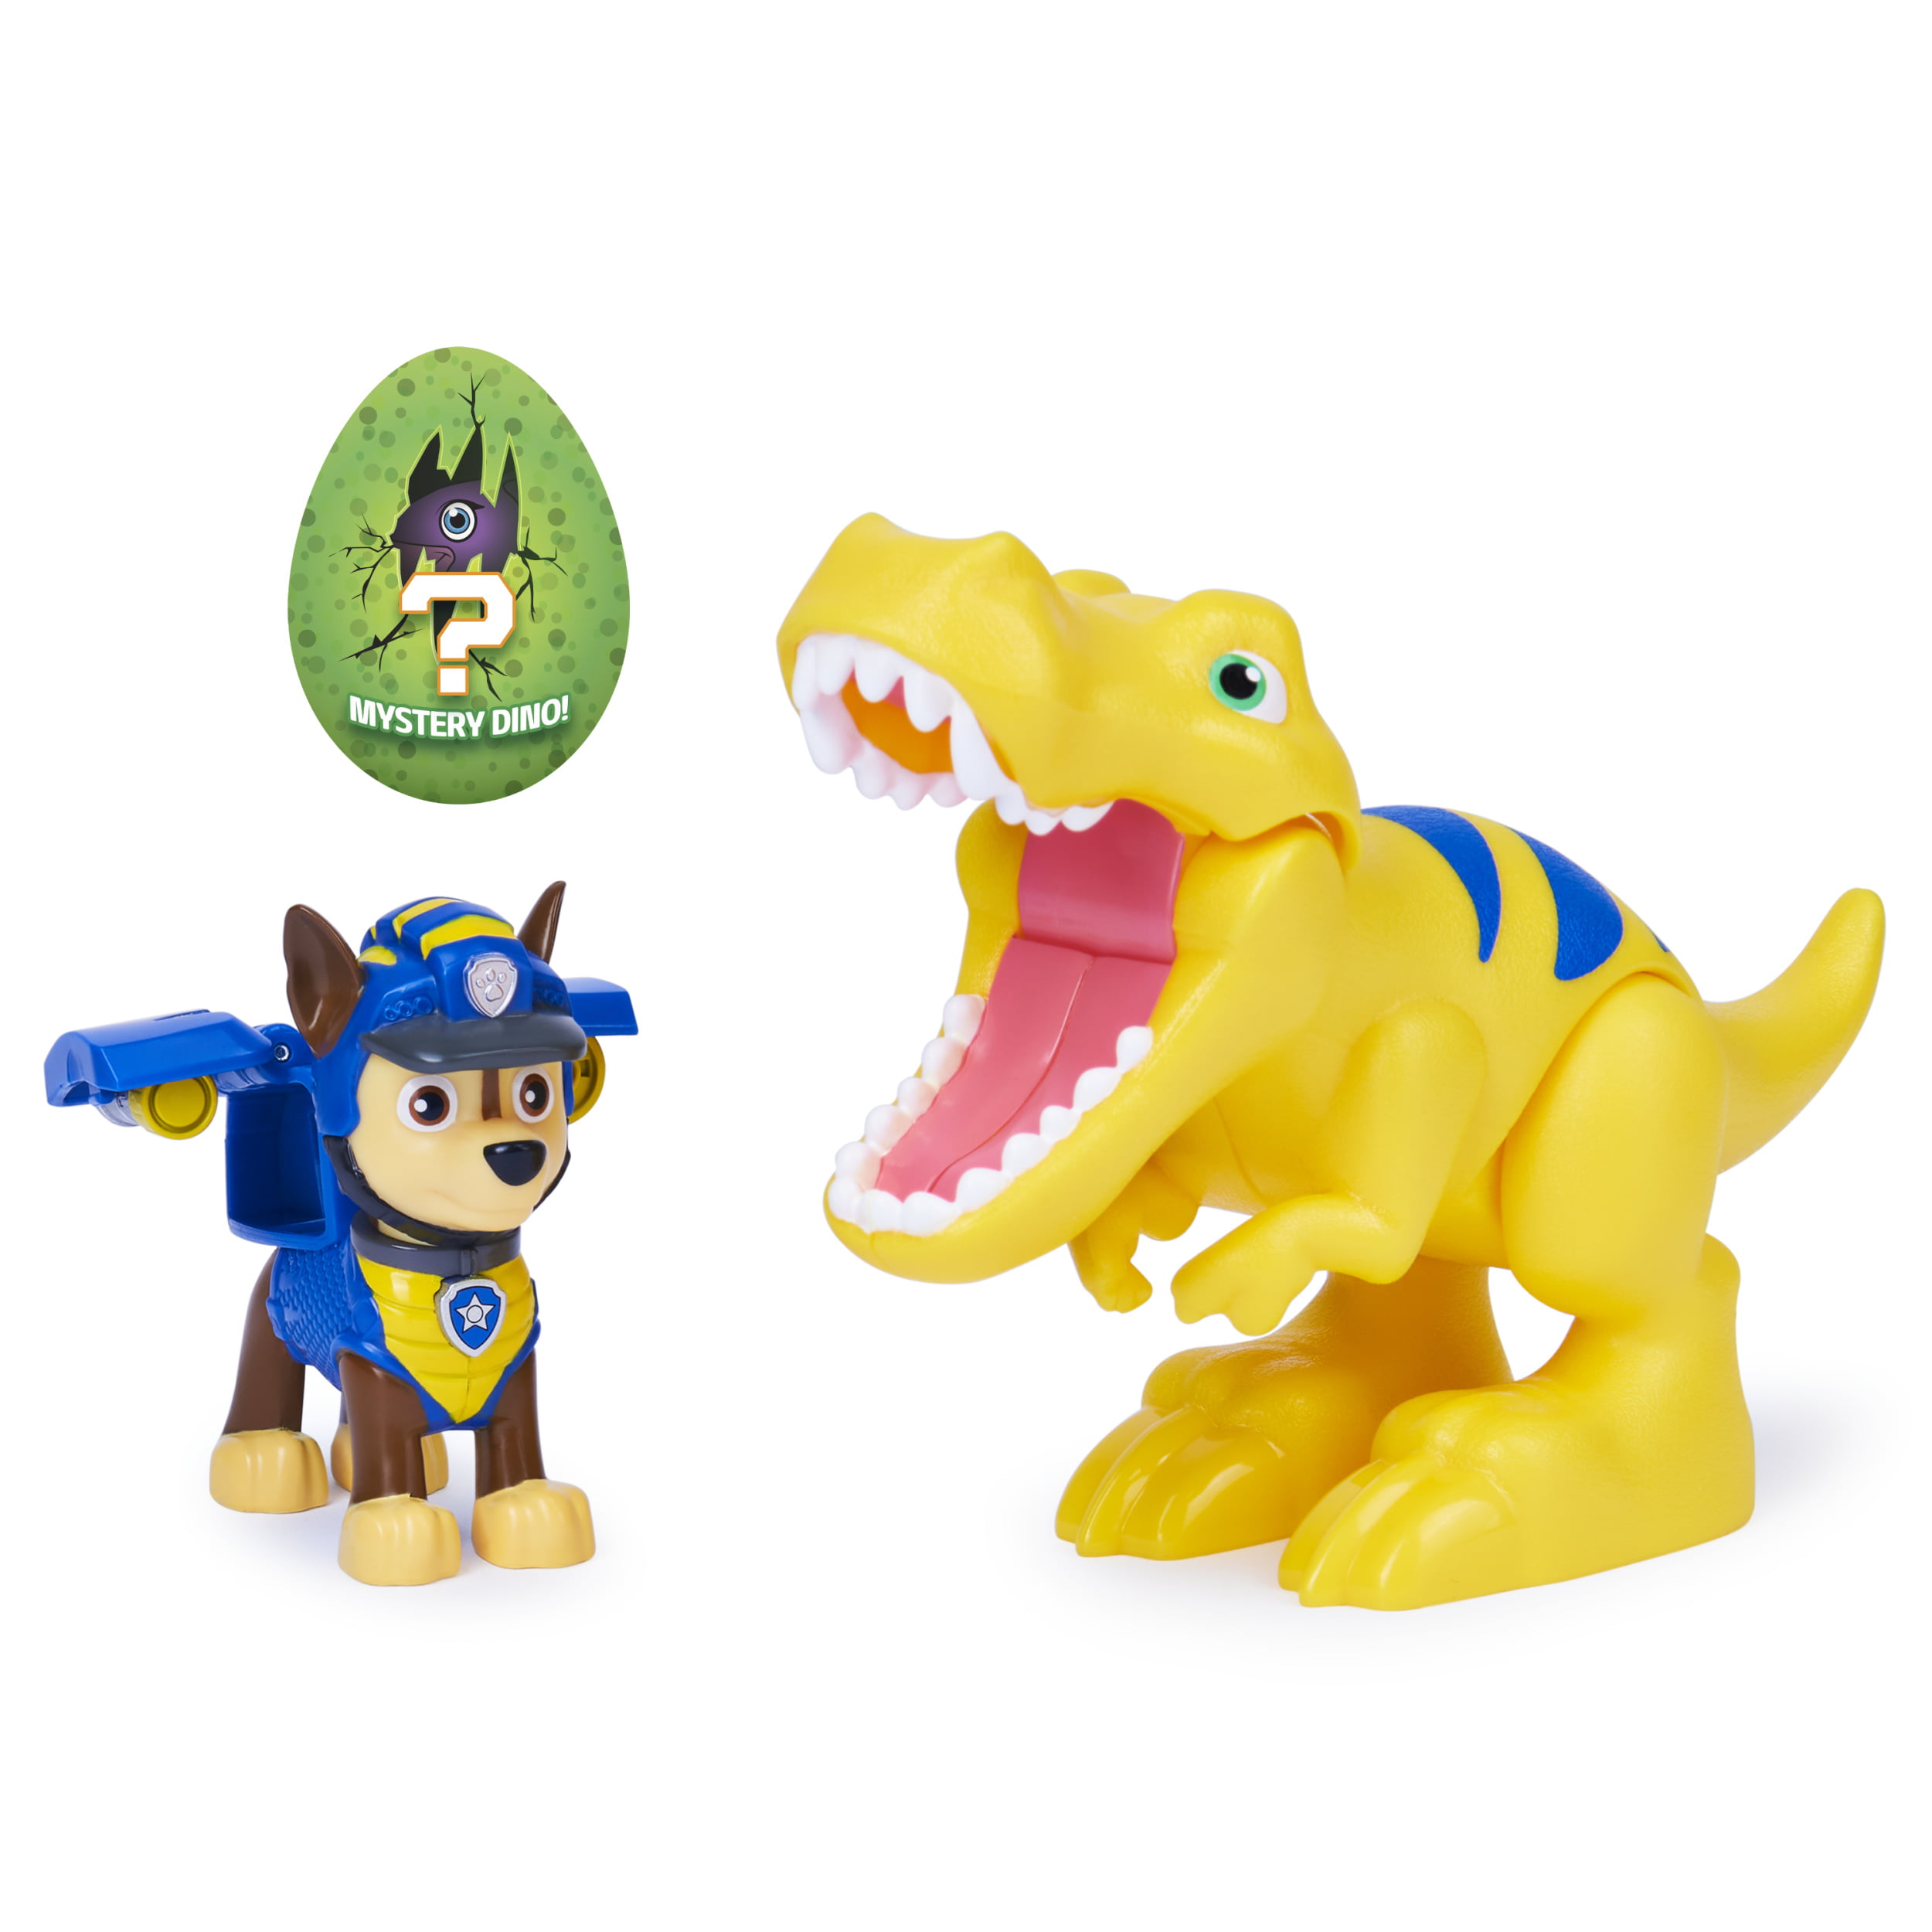 Nom Chien Pat Patrouille Dino Rescue PAW Patrol, Dino Rescue Chase and Dinosaur Action Figure Set, for Kids